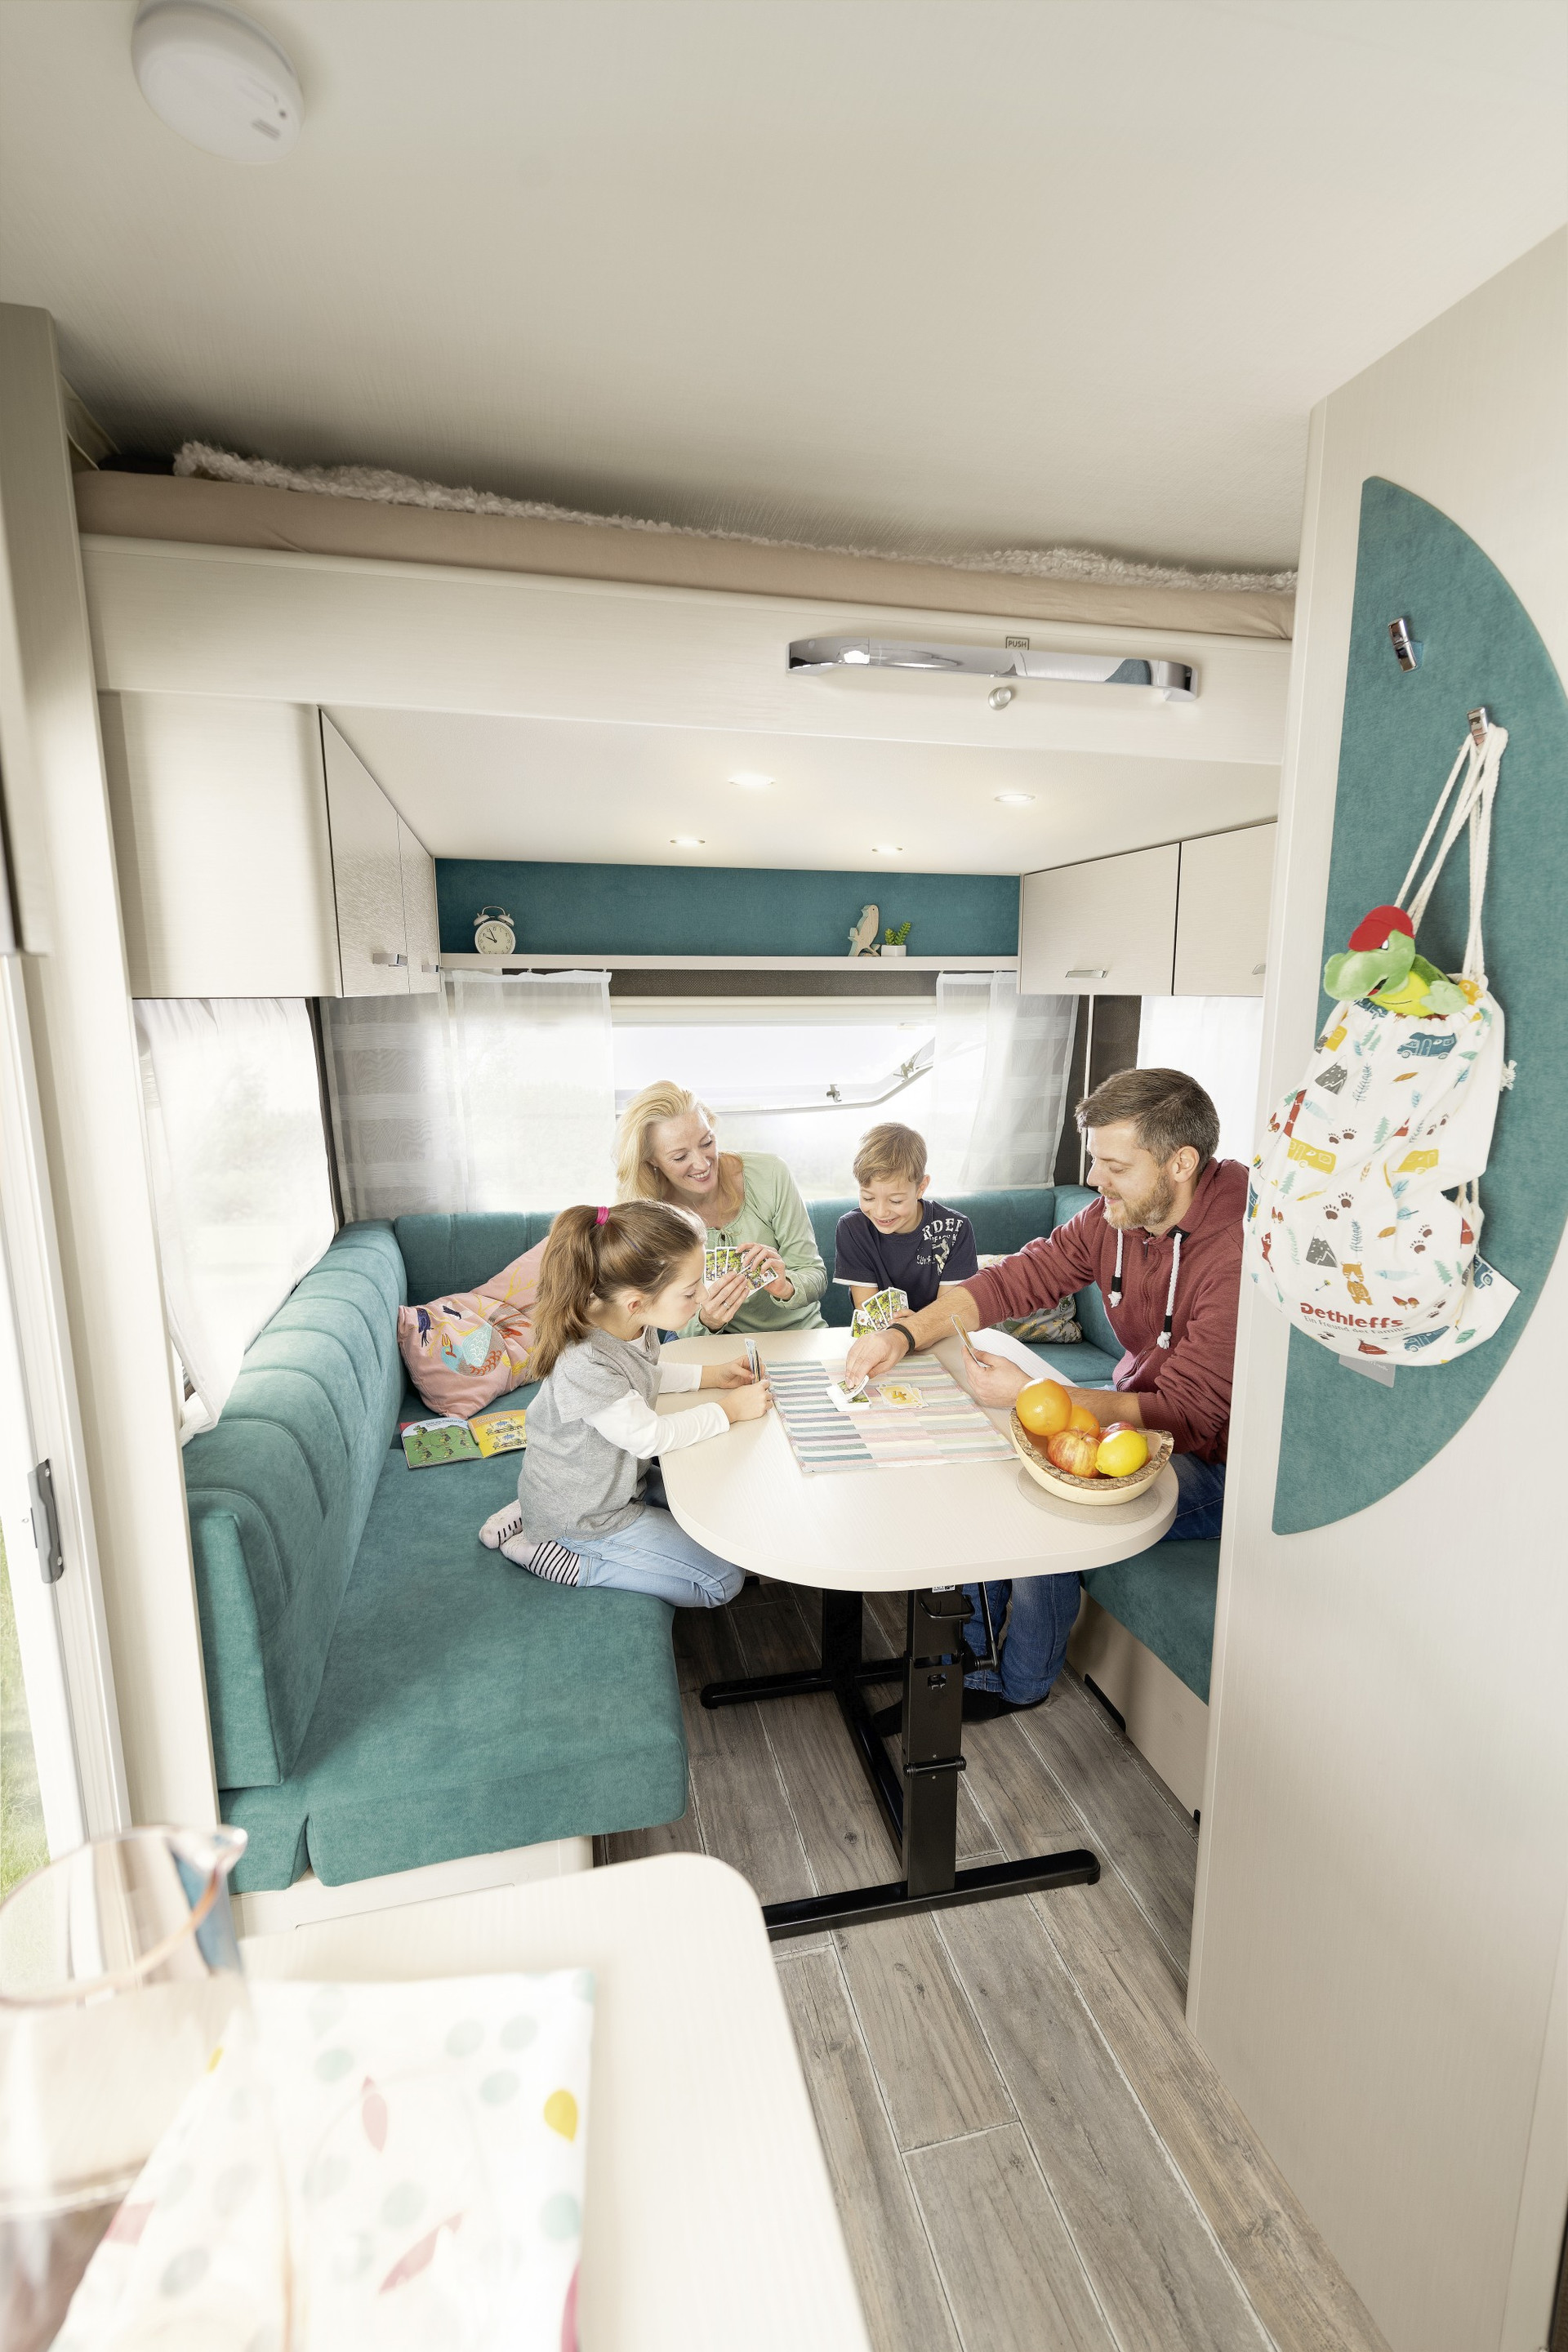 As soon as the pull-down bed is stowed under the roof, your c’go up is ready for the day’s activities. And in bad weather, the kids can play happily in their own children’s area • 525 KR | Blue Lagoon